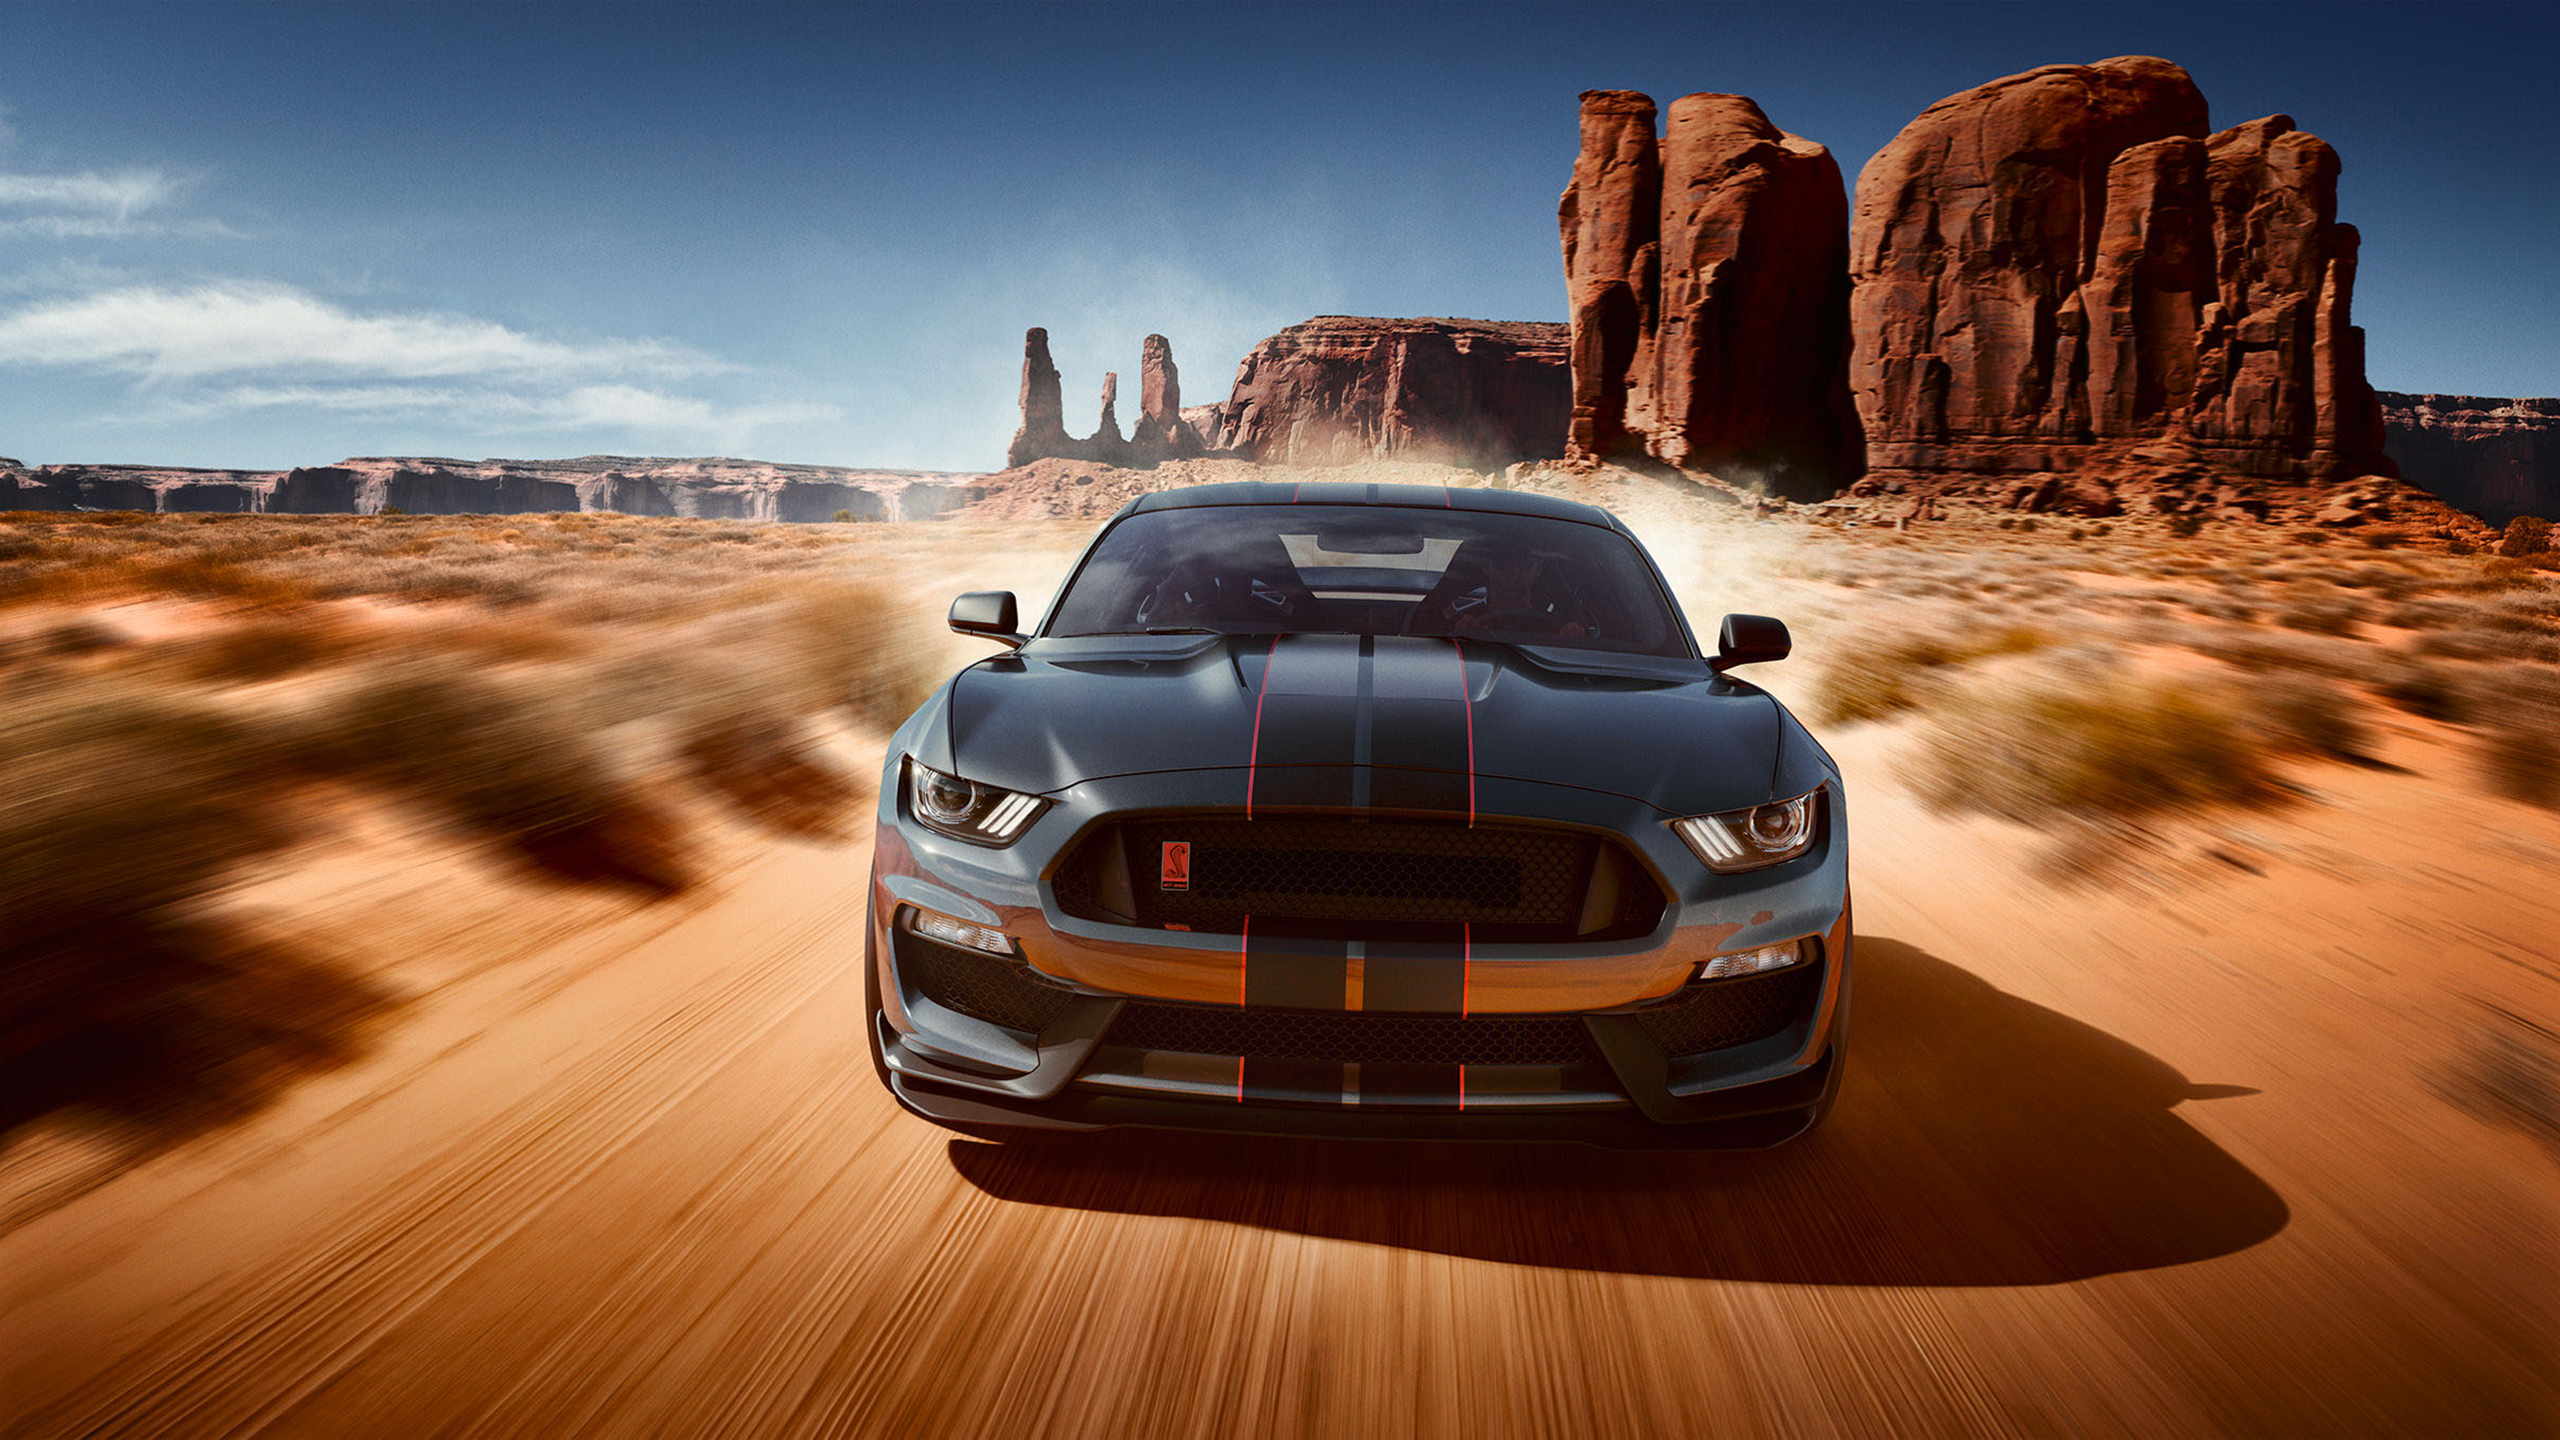 Vehicles Ford Mustang Shelby GT500 2560x1440